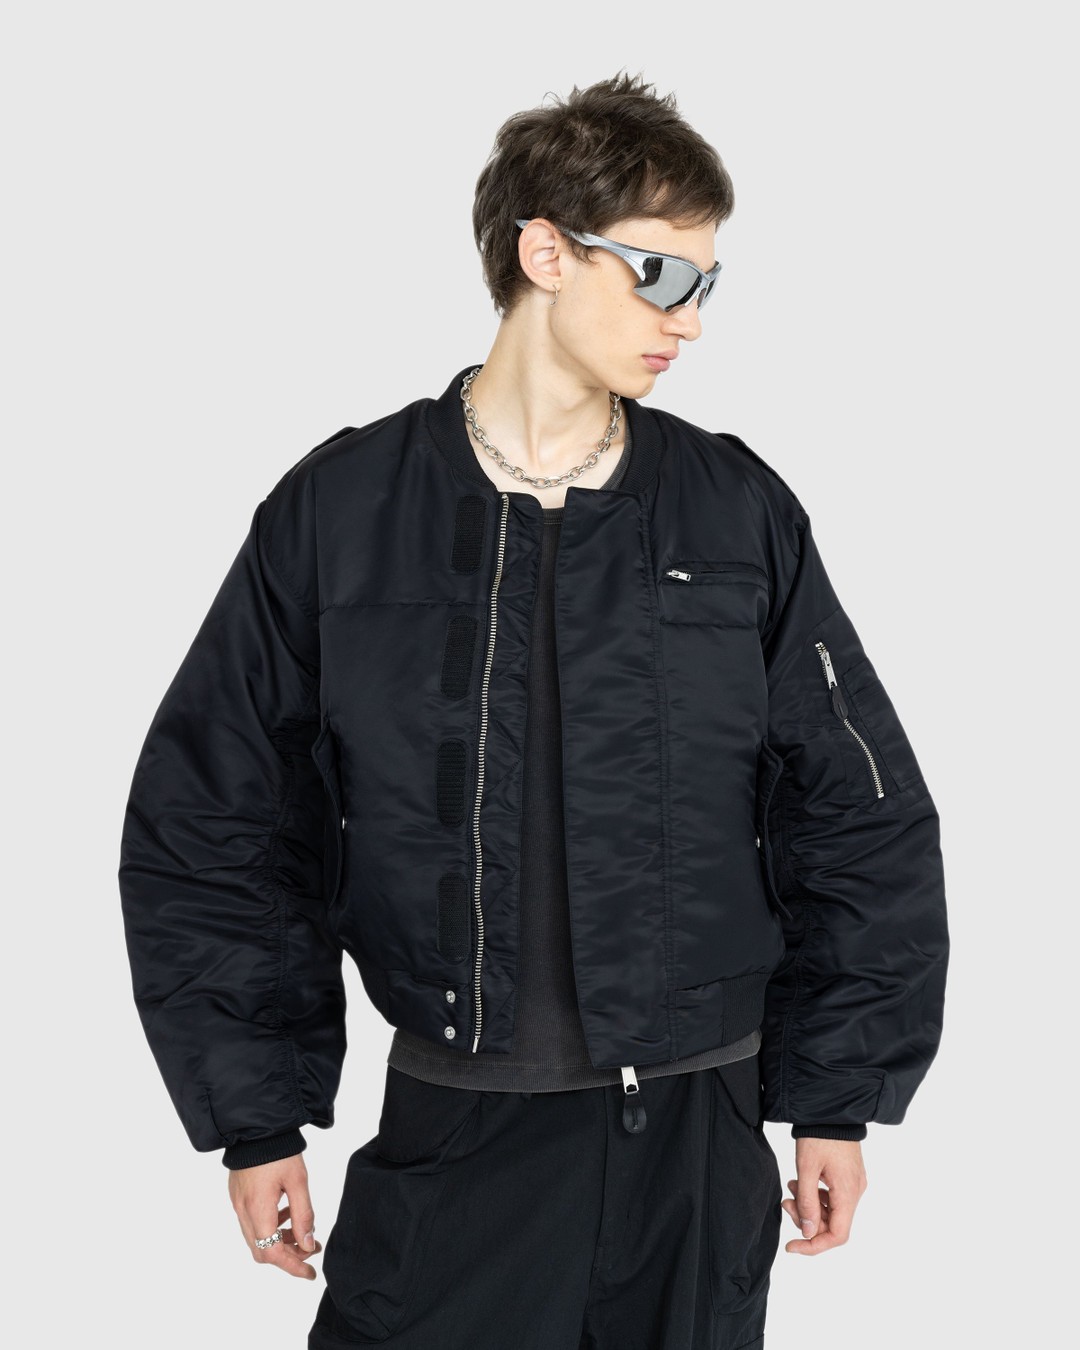 Entire Studios – A-2 Bomber Oil - Outerwear - Blue - Image 2